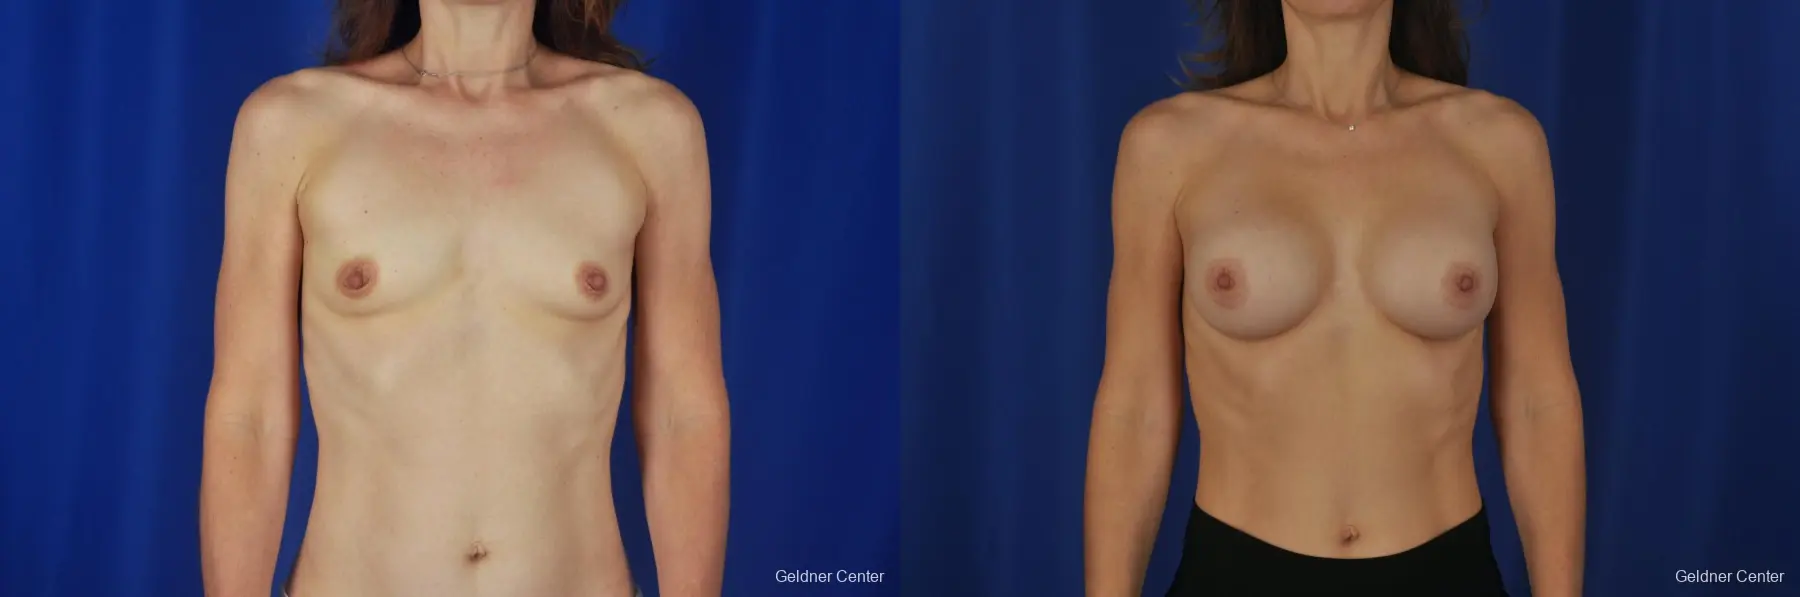 Chicago Breast Augmentation Natrelle Smooth Gel Implants 2067 - Before and After 1